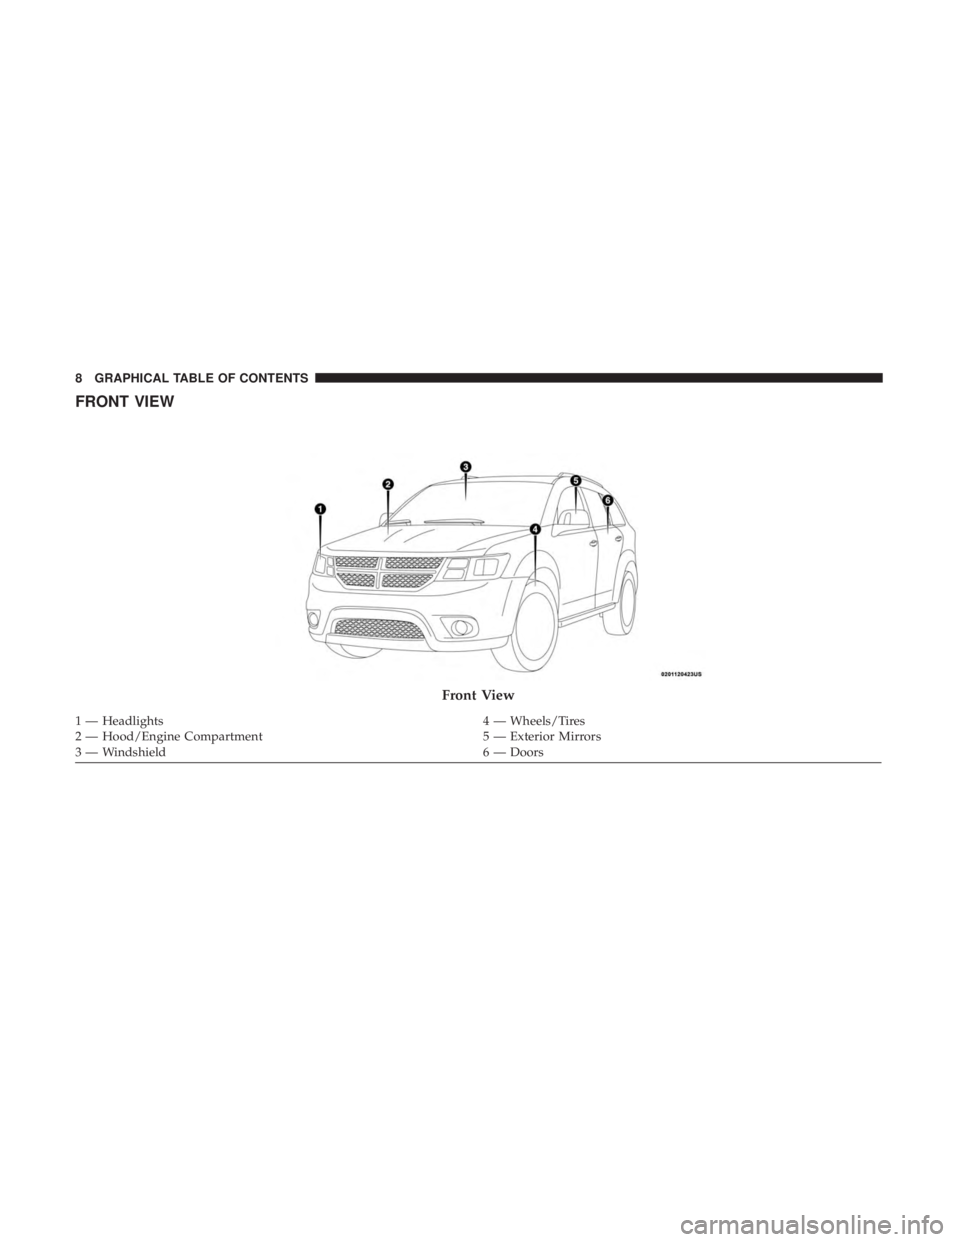 DODGE JOURNEY 2019  Owners Manual FRONT VIEW
Front View
1 — Headlights4 — Wheels/Tires
2 — Hood/Engine Compartment 5 — Exterior Mirrors
3 — Windshield 6 — Doors
8 GRAPHICAL TABLE OF CONTENTS 